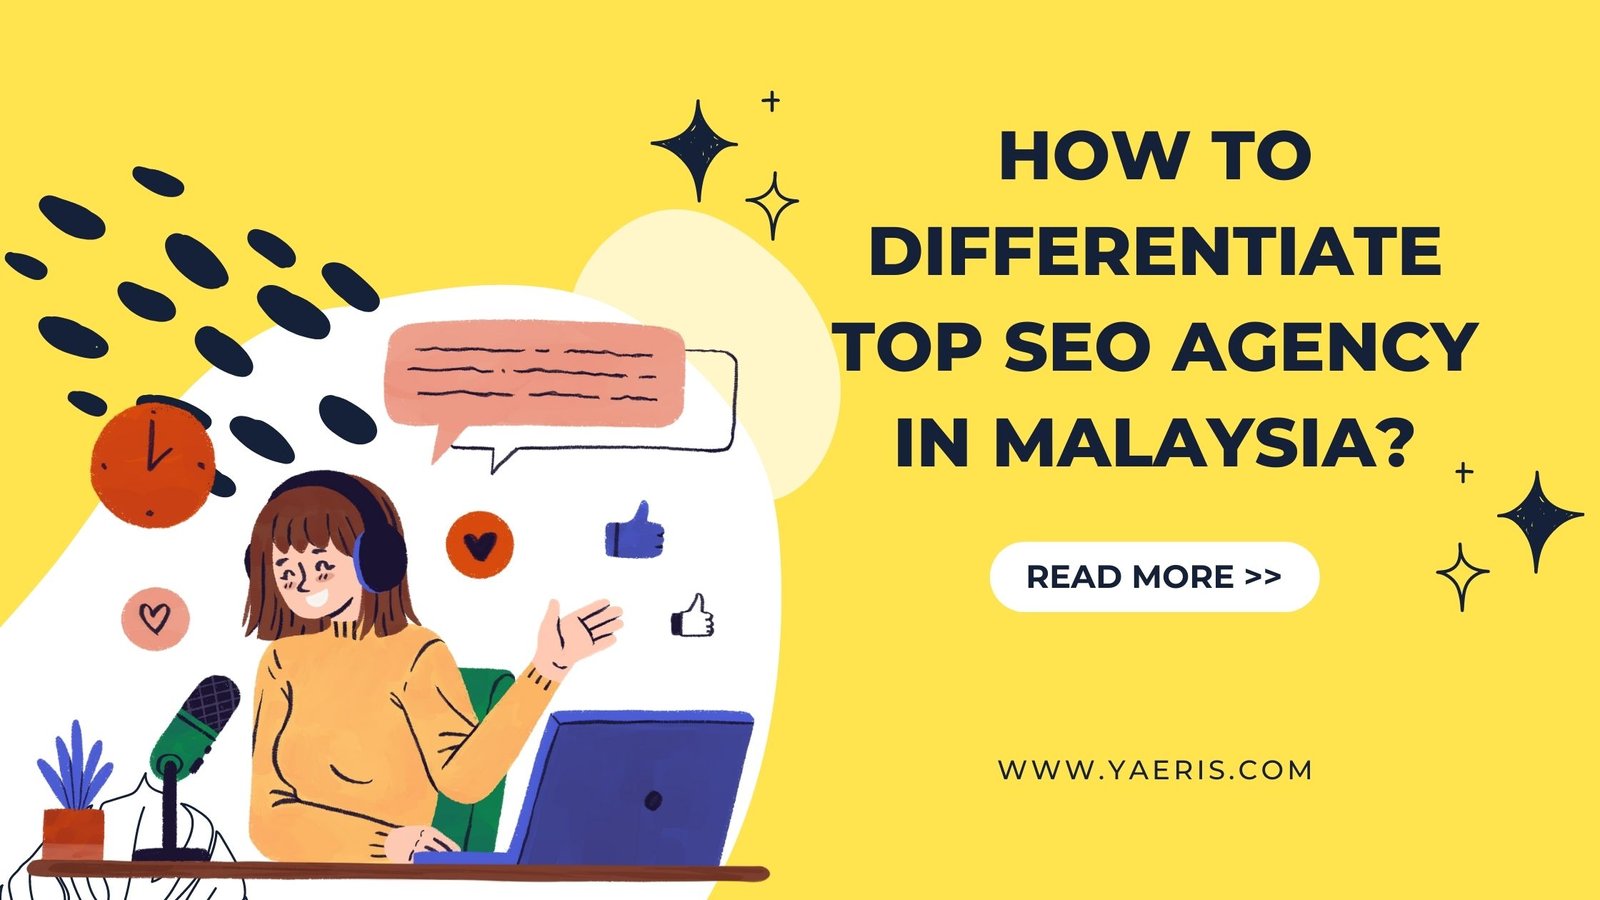 How to differentiate top SEO agency in Malaysia